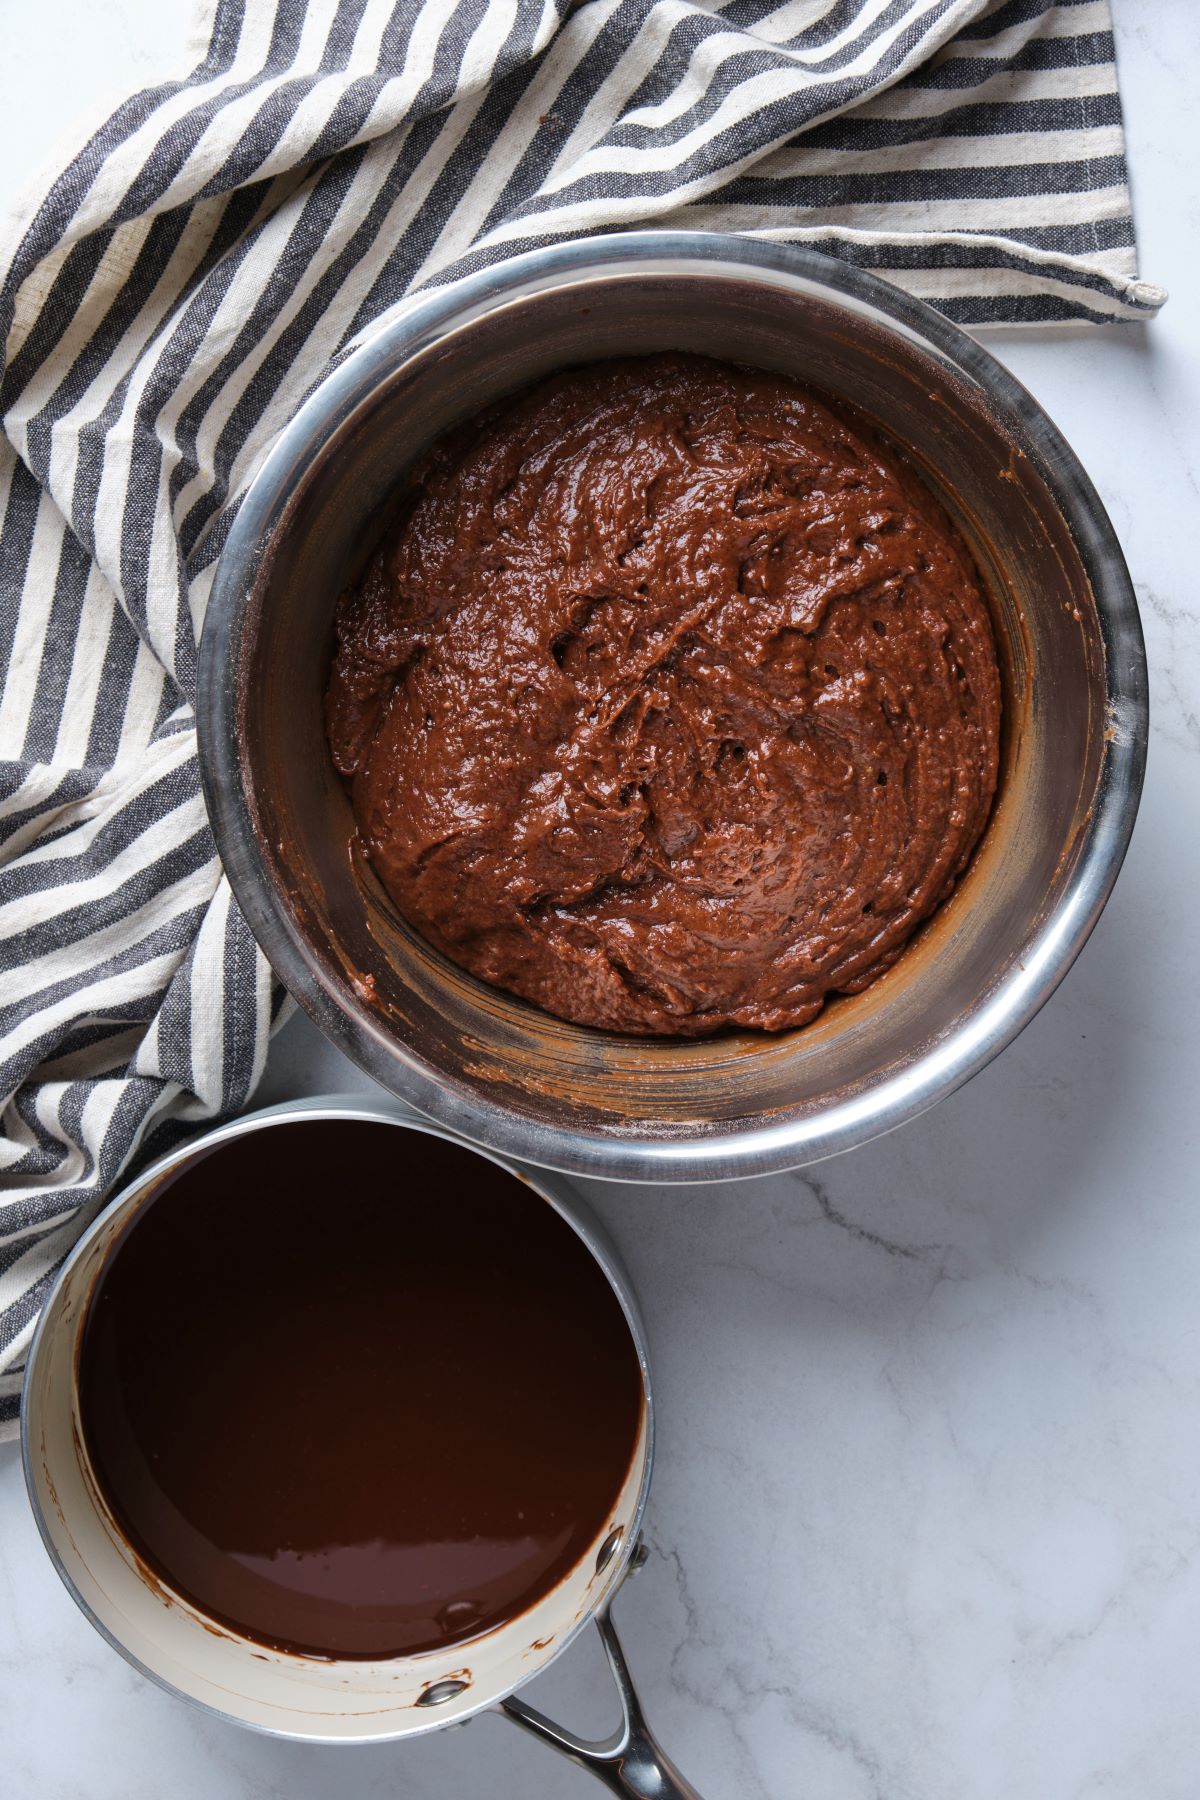 The chocolate fudge batter and the chocolate butter mixture in bowls.